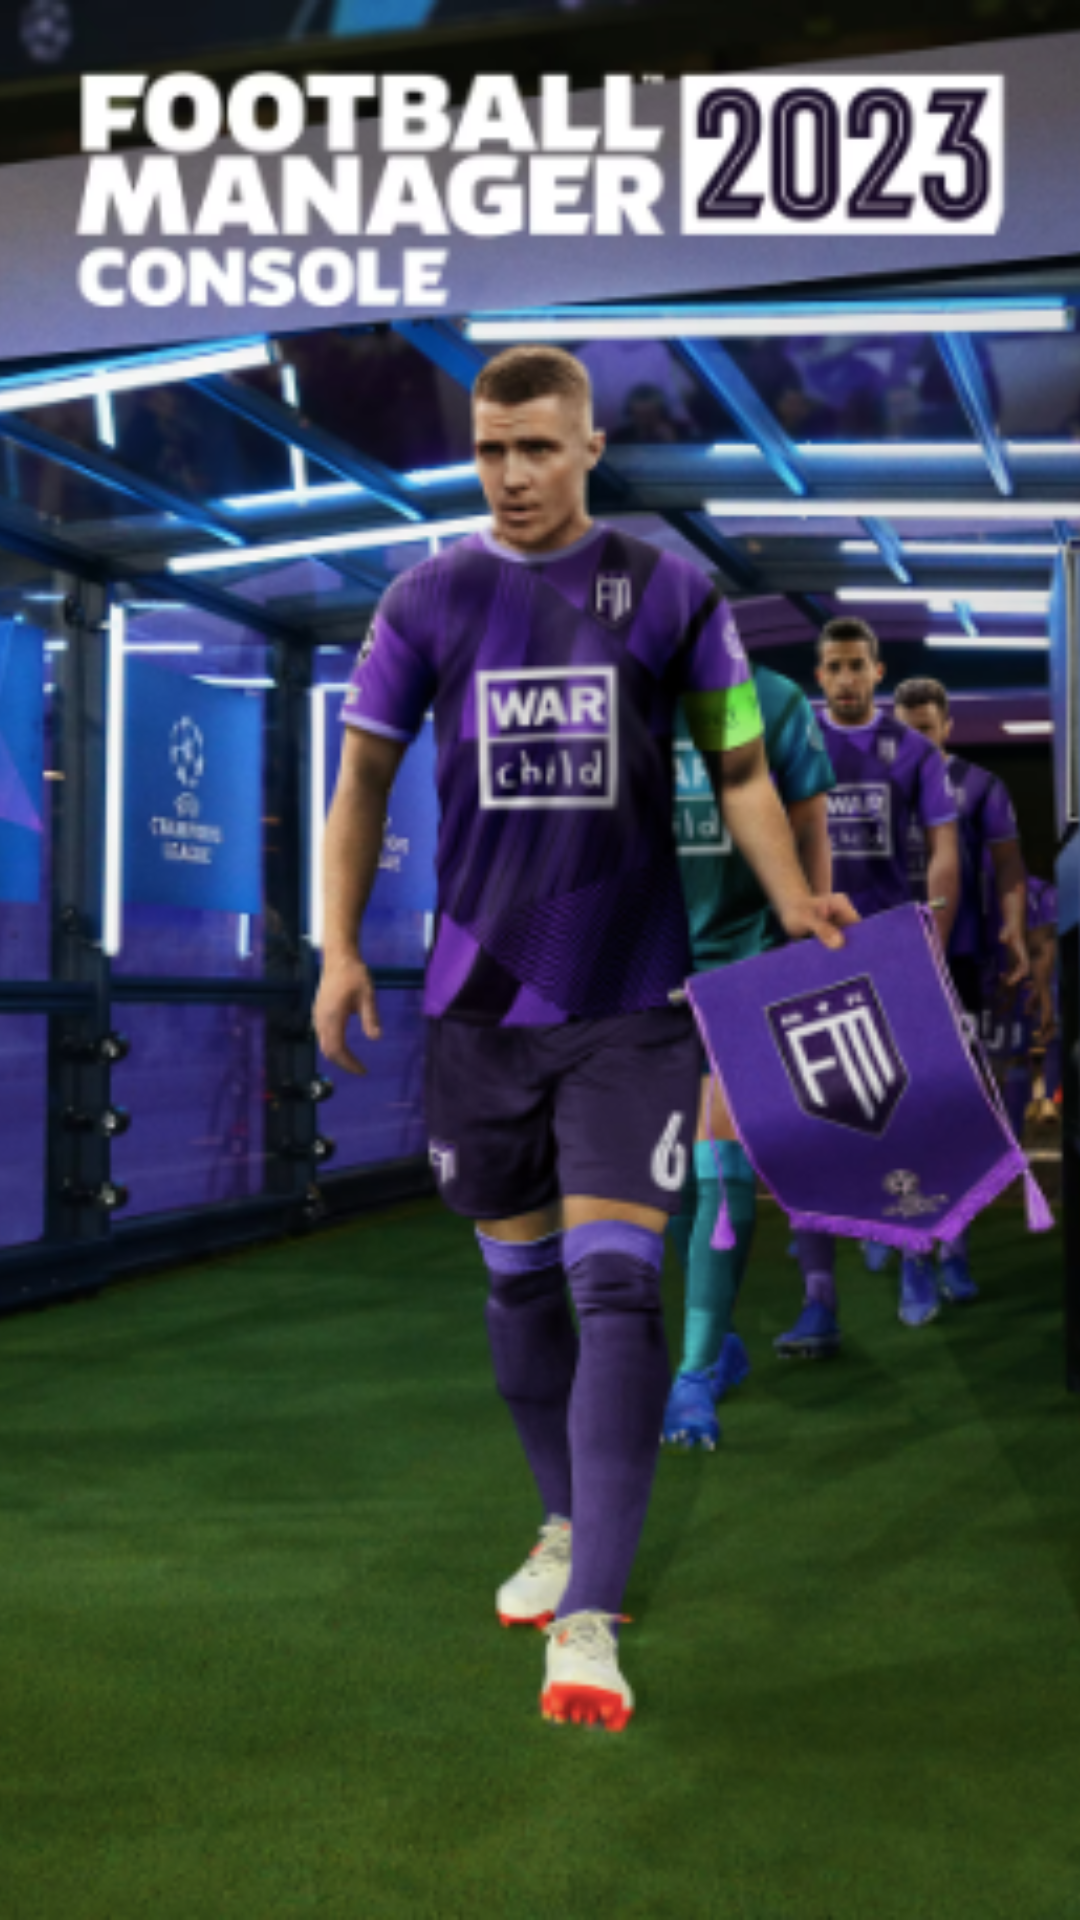 Prime Gaming September Content Update: Football Manager 2023